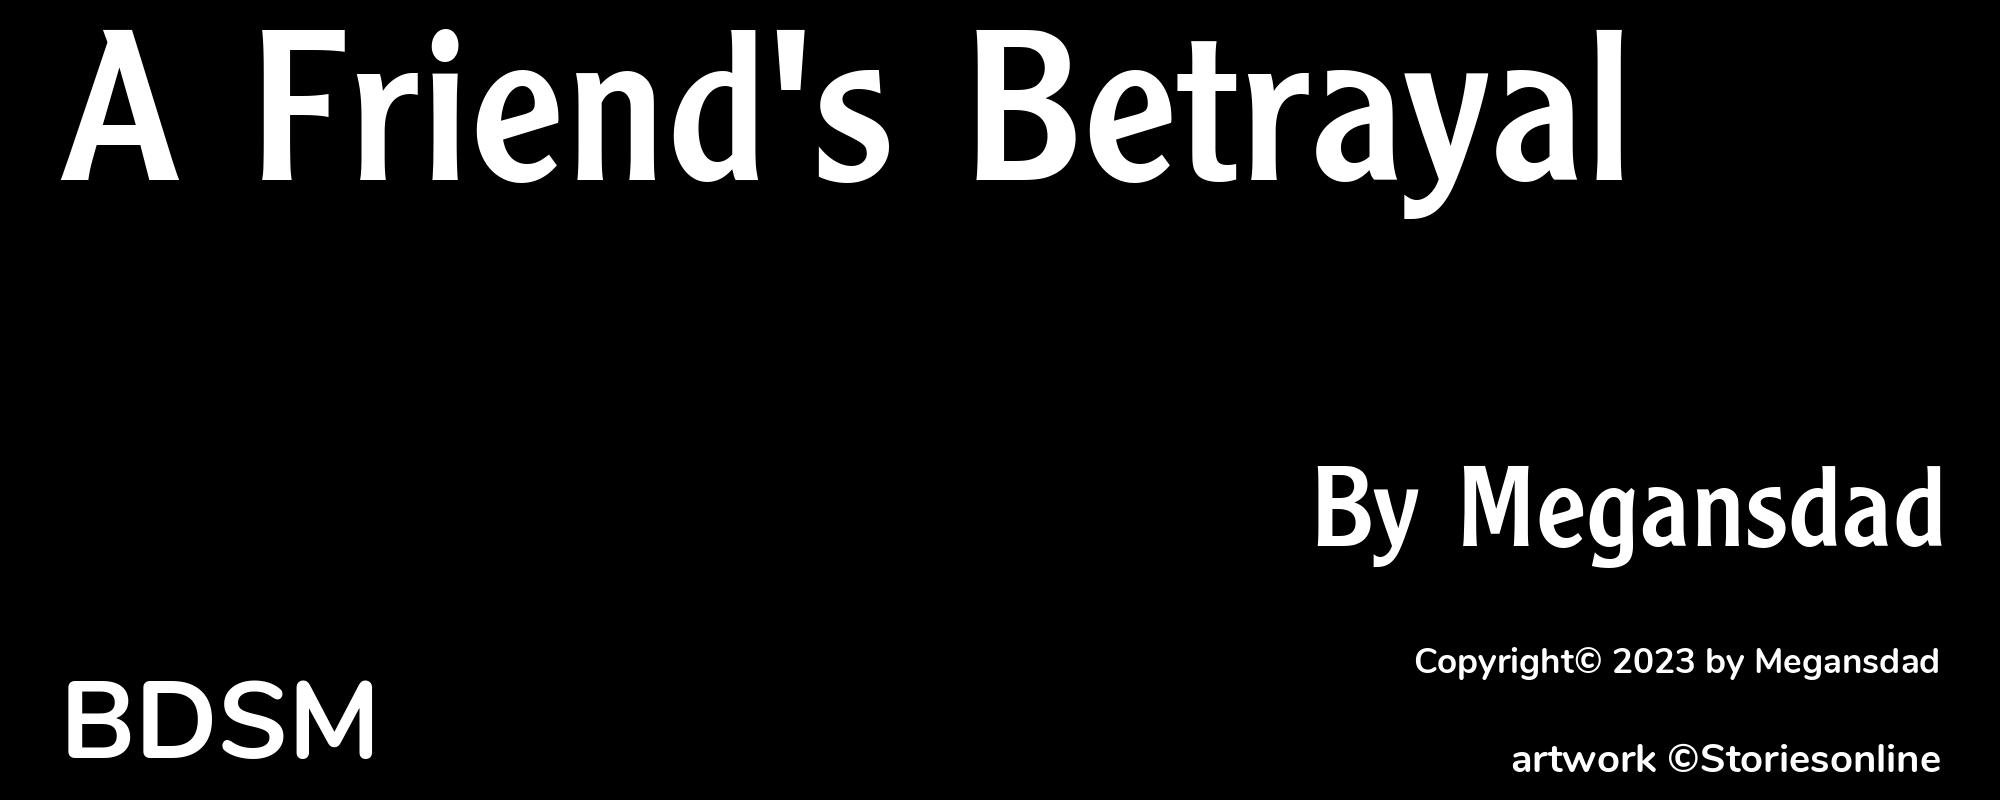 A Friend's Betrayal - Cover